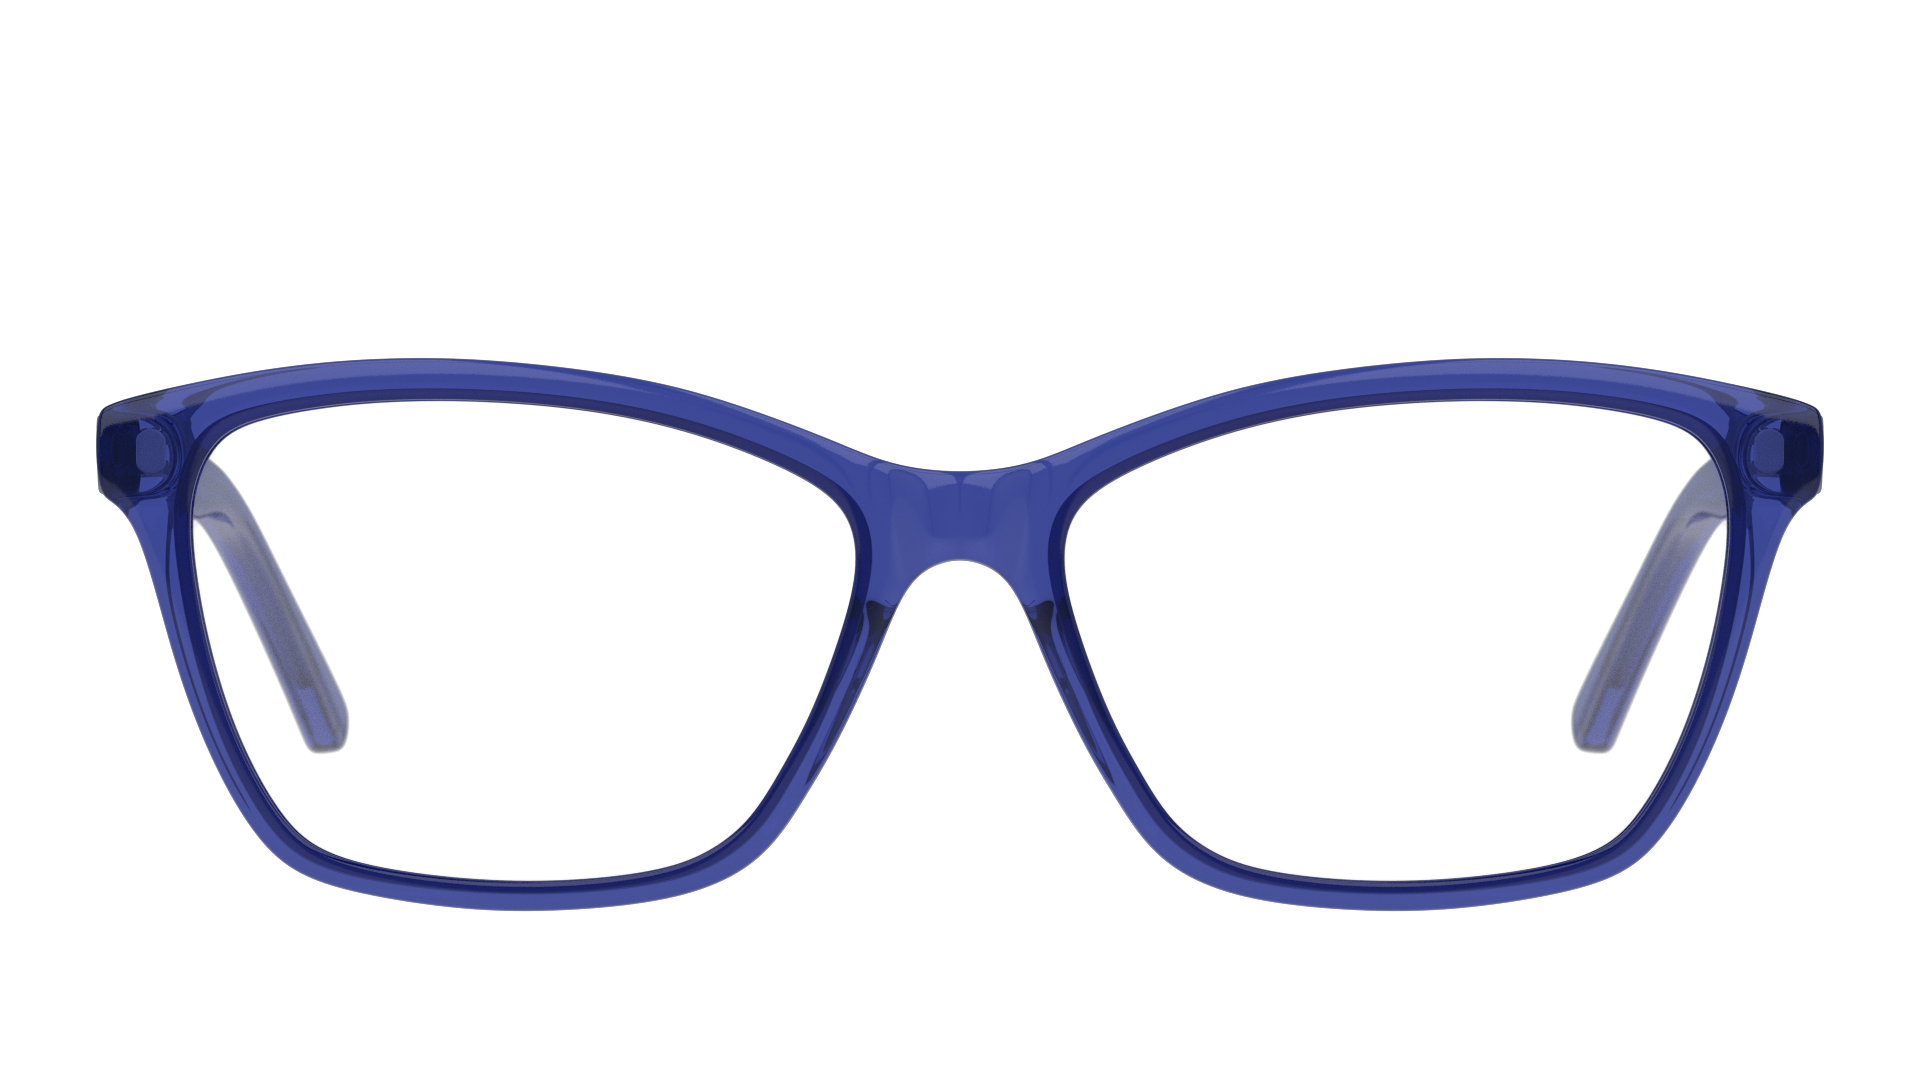 Front Seen SNFF10 (CT) Glasses Transparent / Navy